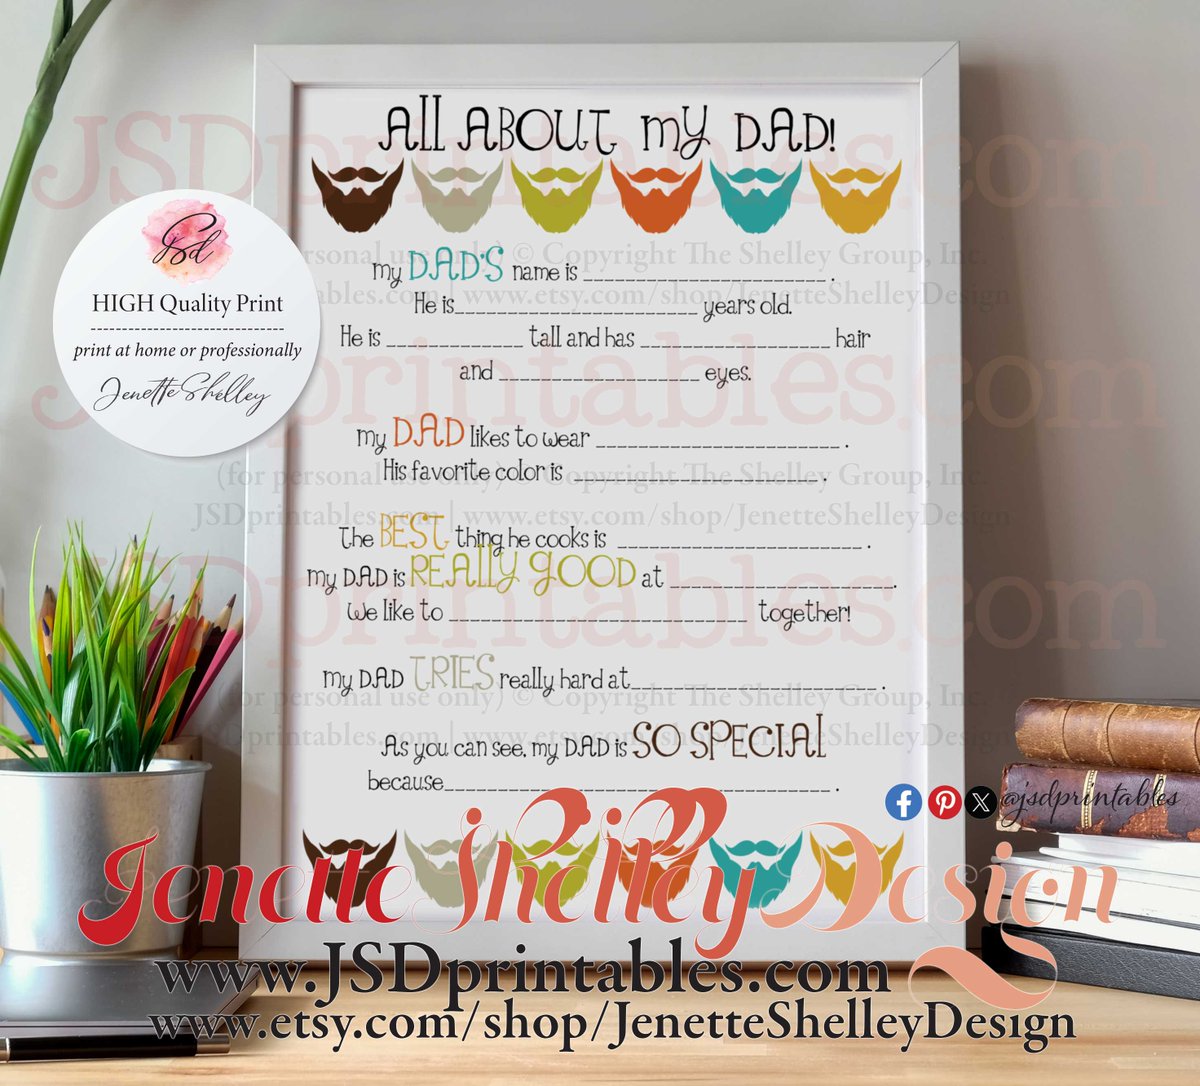 jsdprintables.com/shop/all-about… @jsdprintables #keepsakes #fathersday #dad #happyfathersday #fathersdaygiftideas #fathersdaygift #giftsforhim Simply print from home or the office, have the kids fill it out, and watch as dad's heart melts when he sees the thoughtful responses.